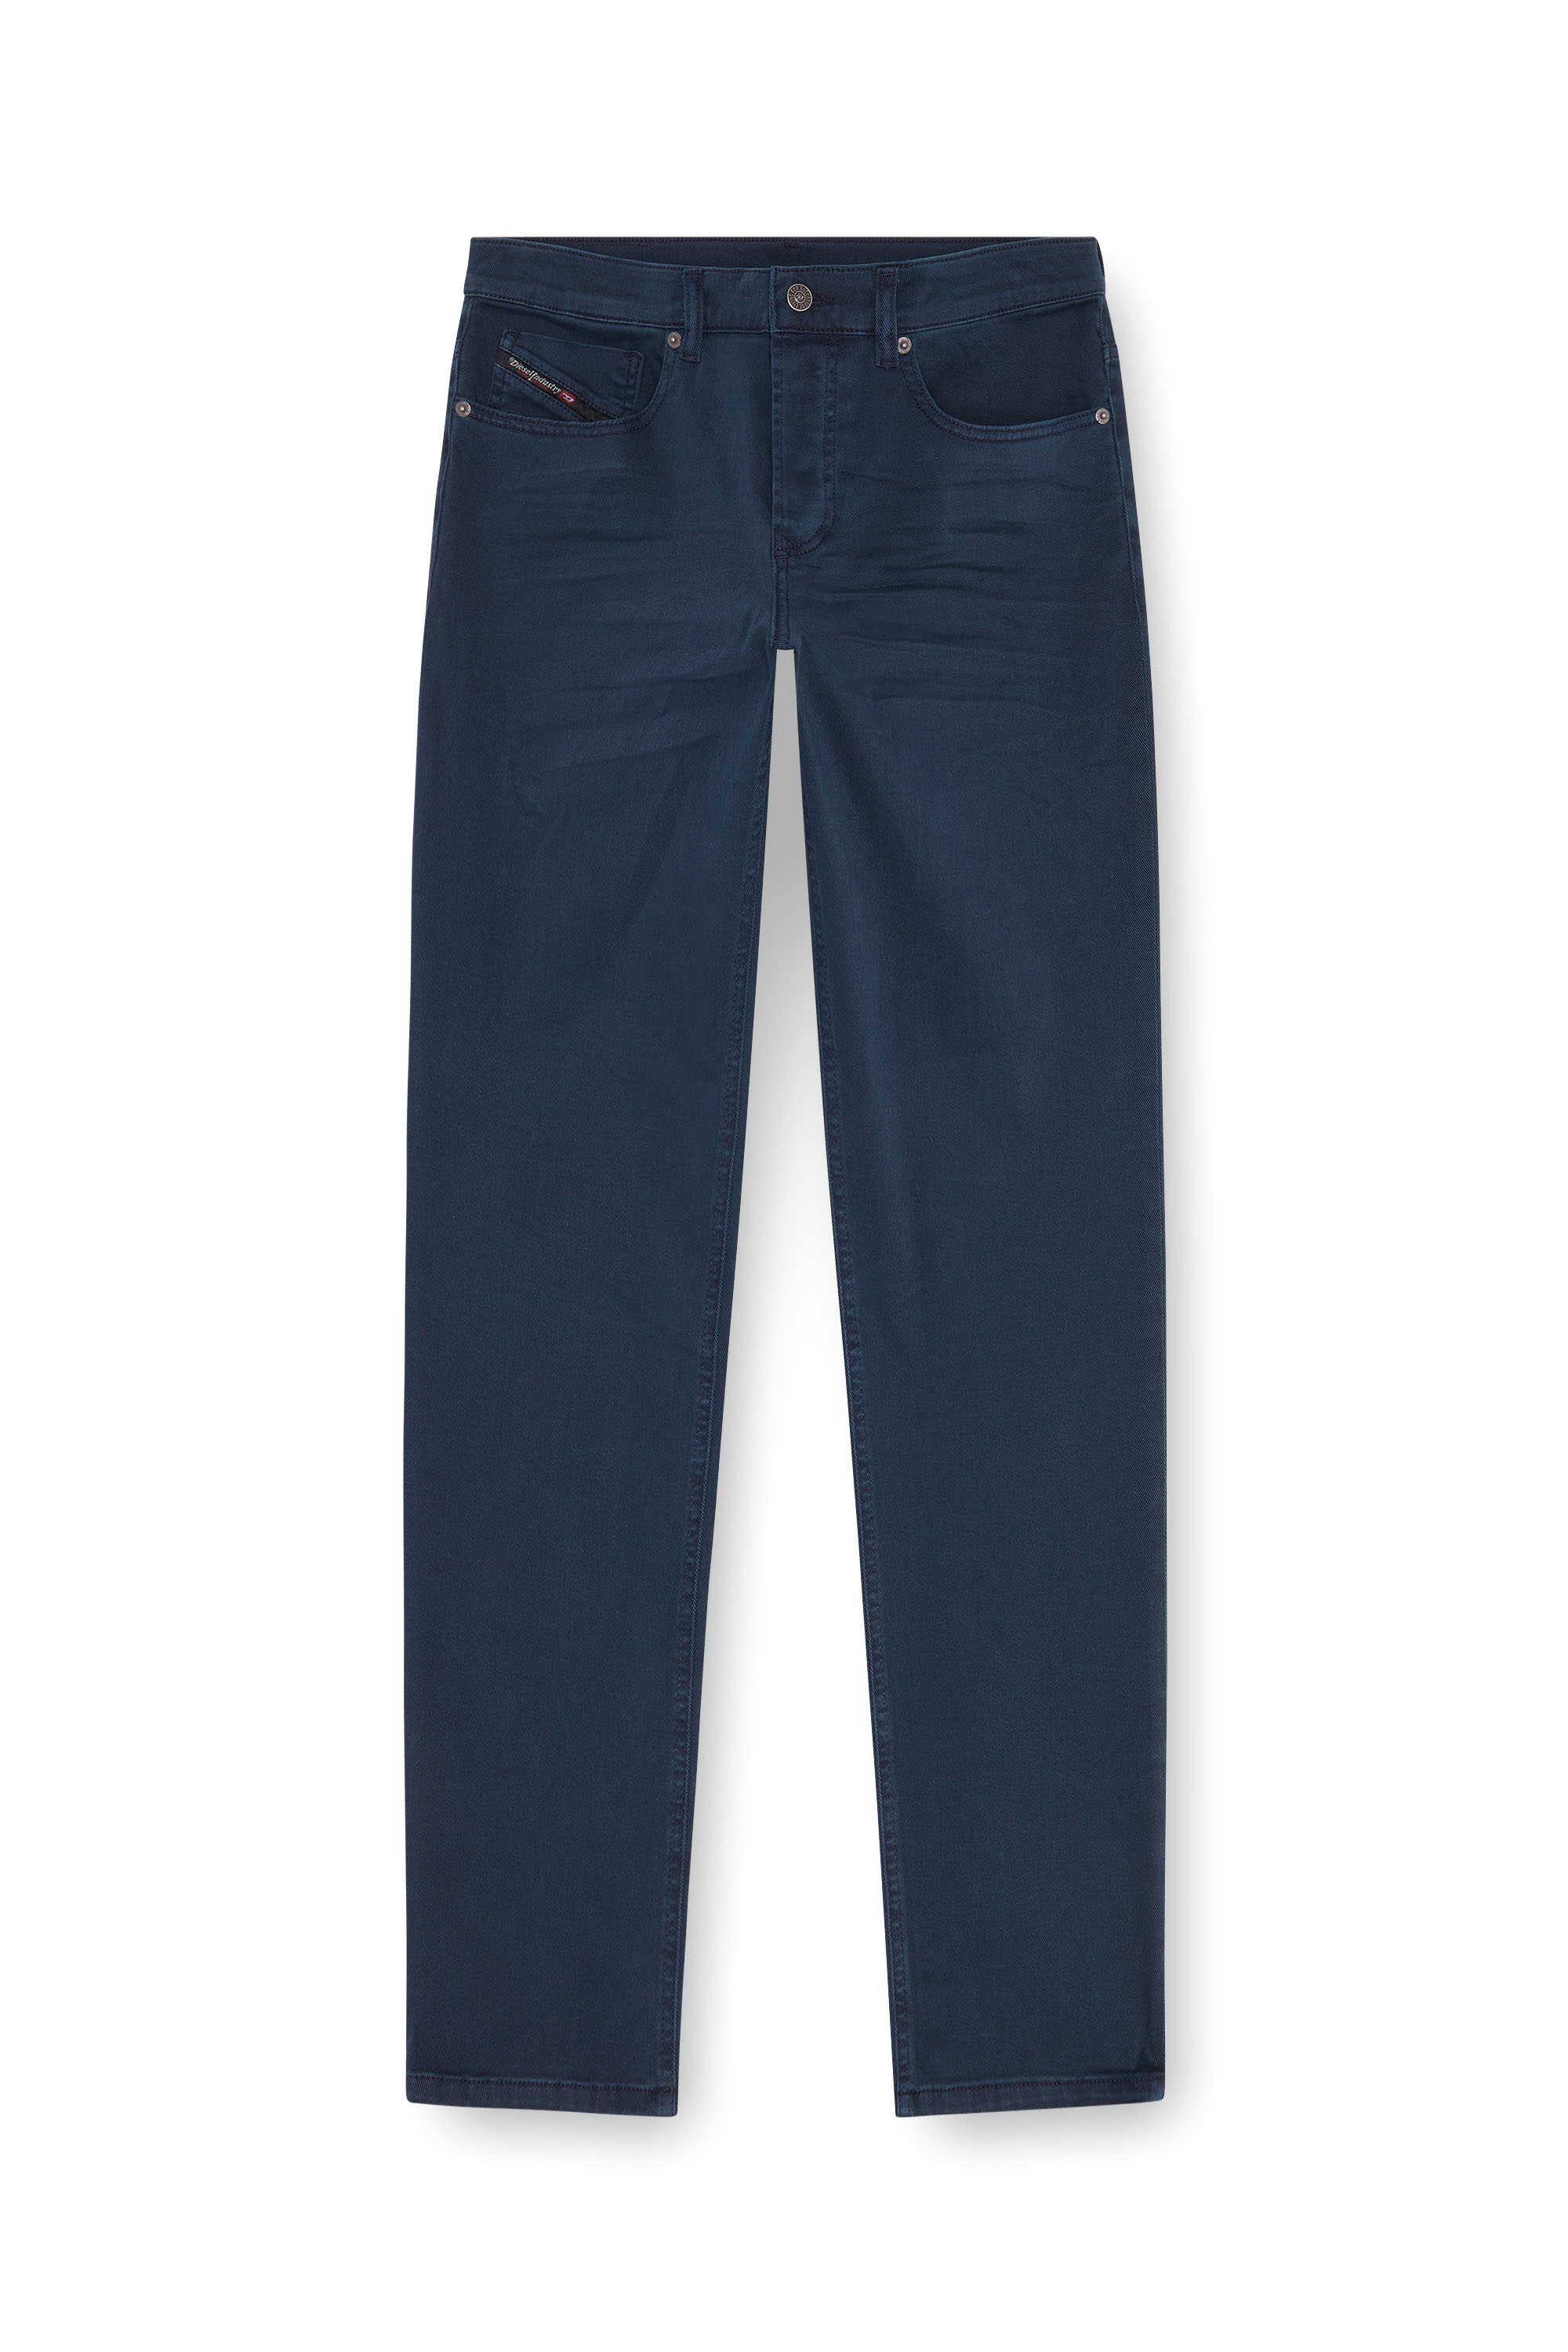 Diesel - Tapered Jeans 2023 D-Finitive 0QWTY, Hombre Tapered Jeans - 2023 D-Finitive in Azul marino - Image 3